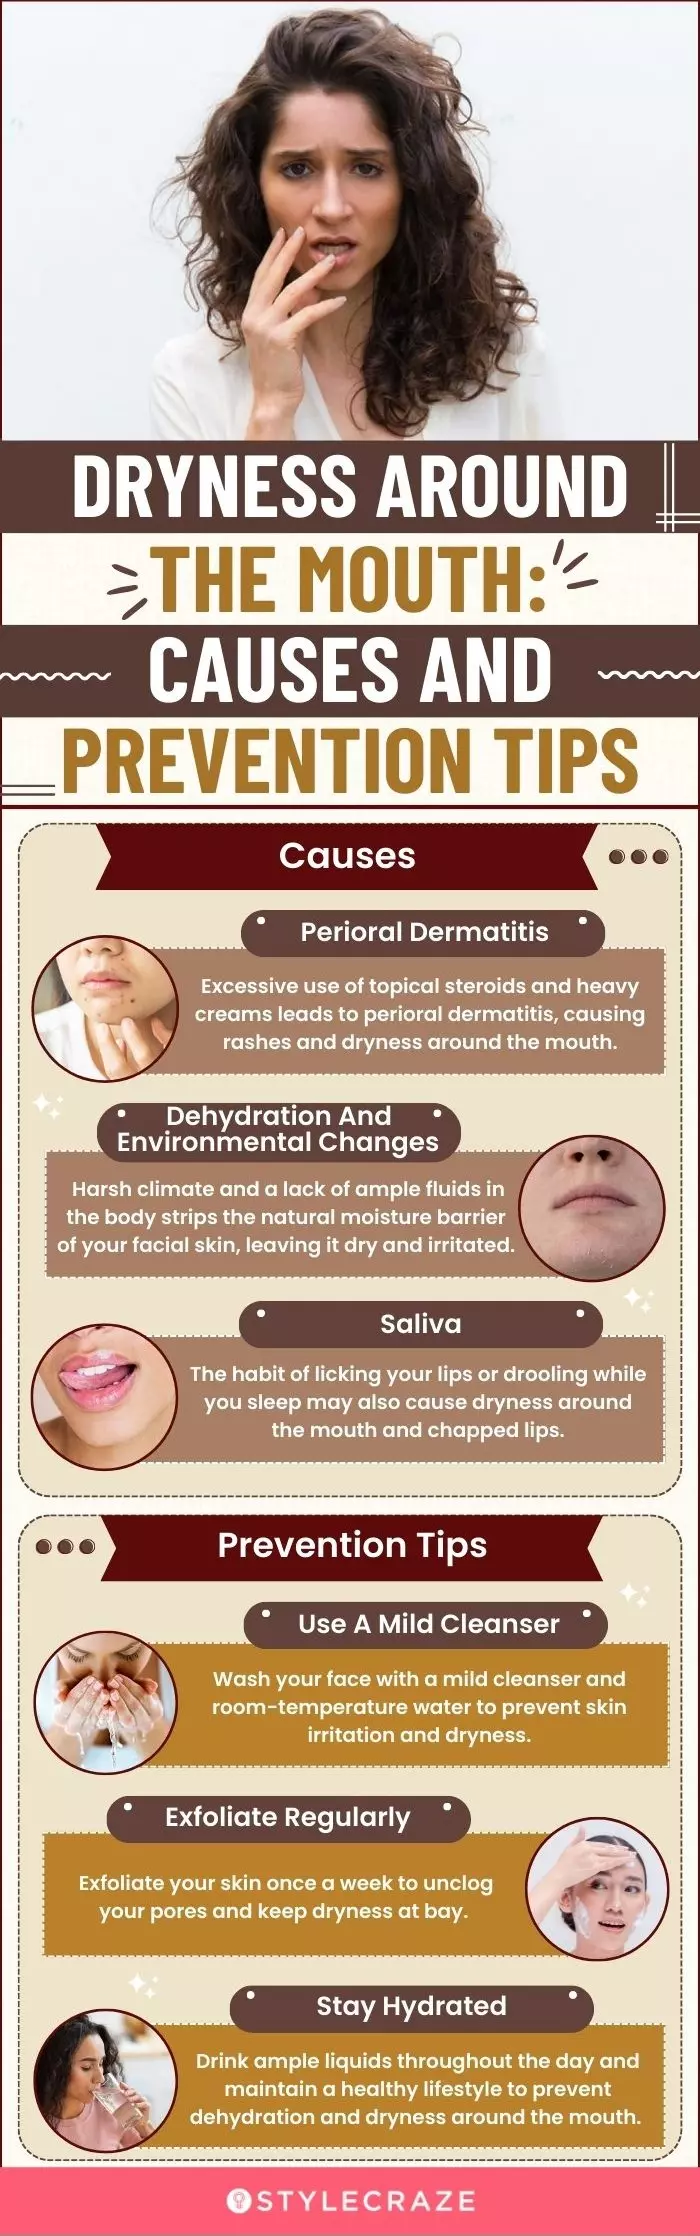 dryness around the mouth causes and prevention tips (infographic)